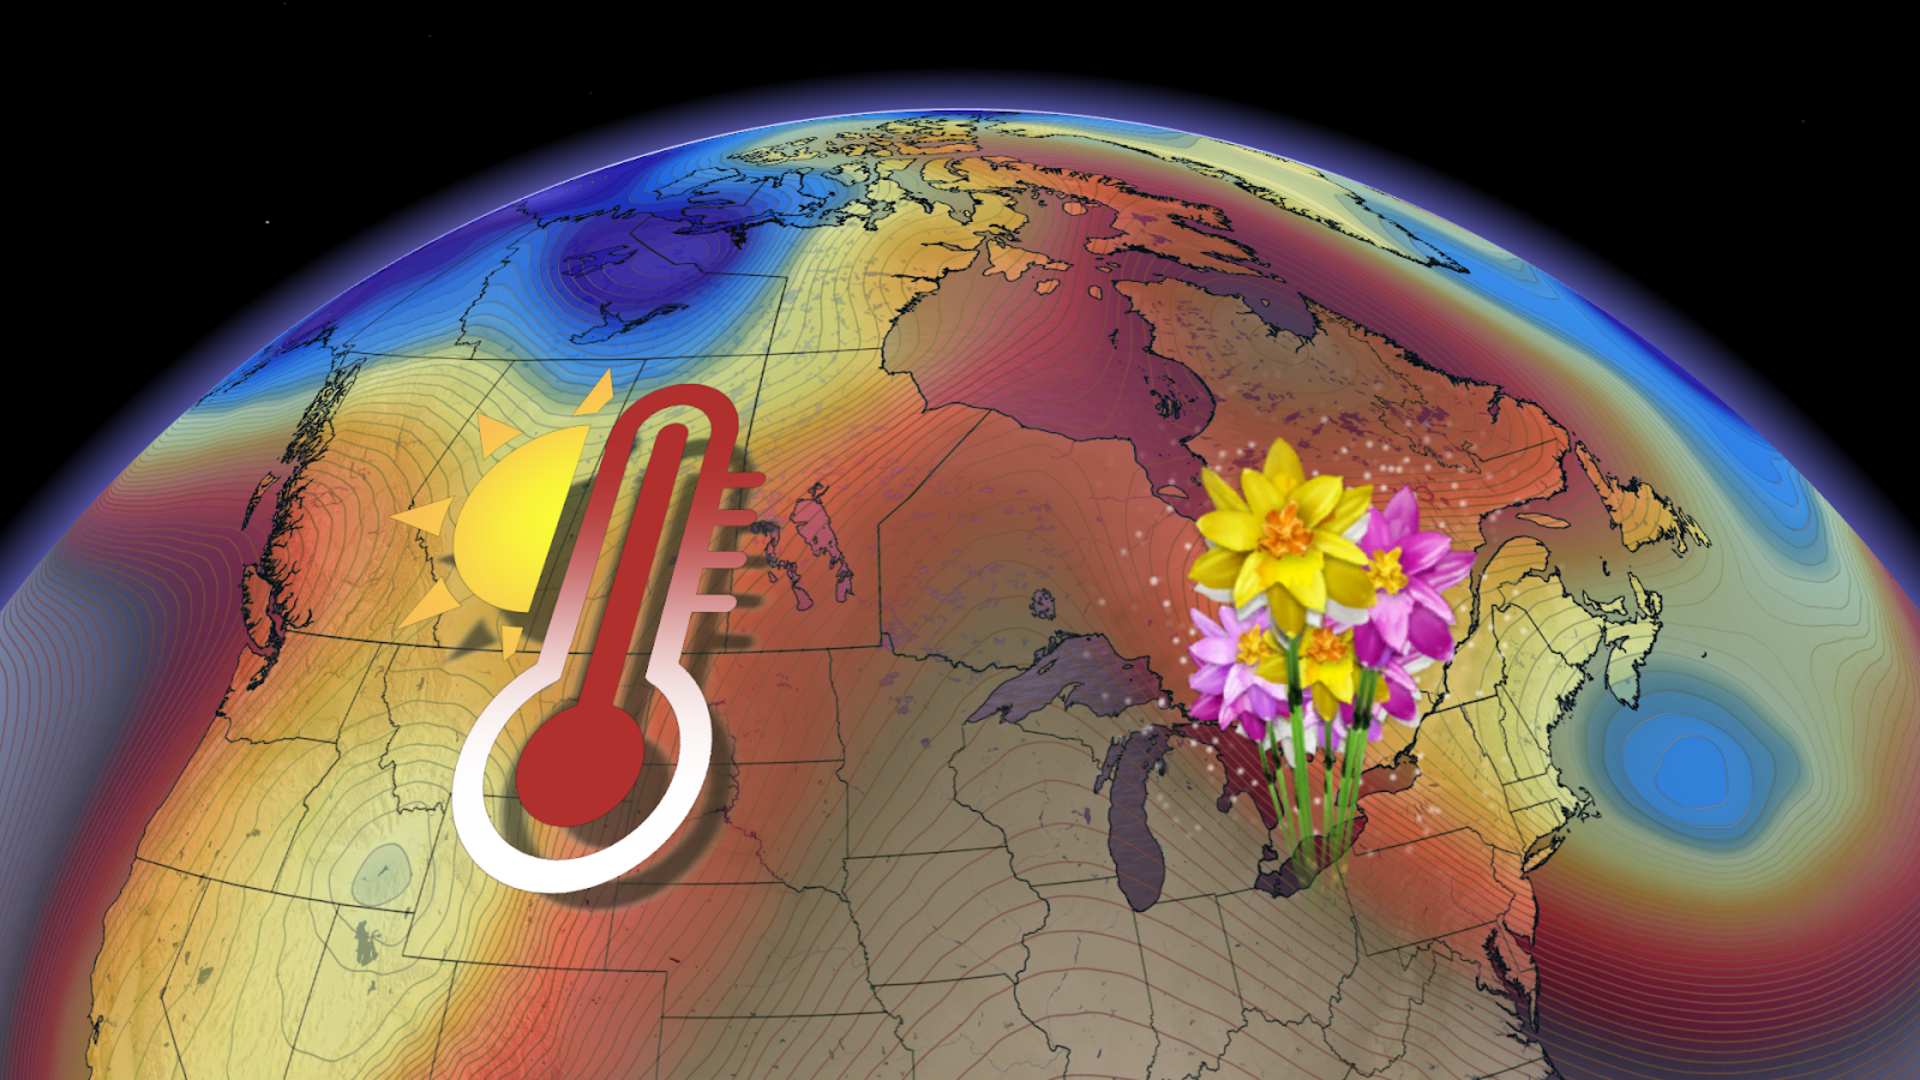 Canada faces a fickle April as winter wanes and summer teases